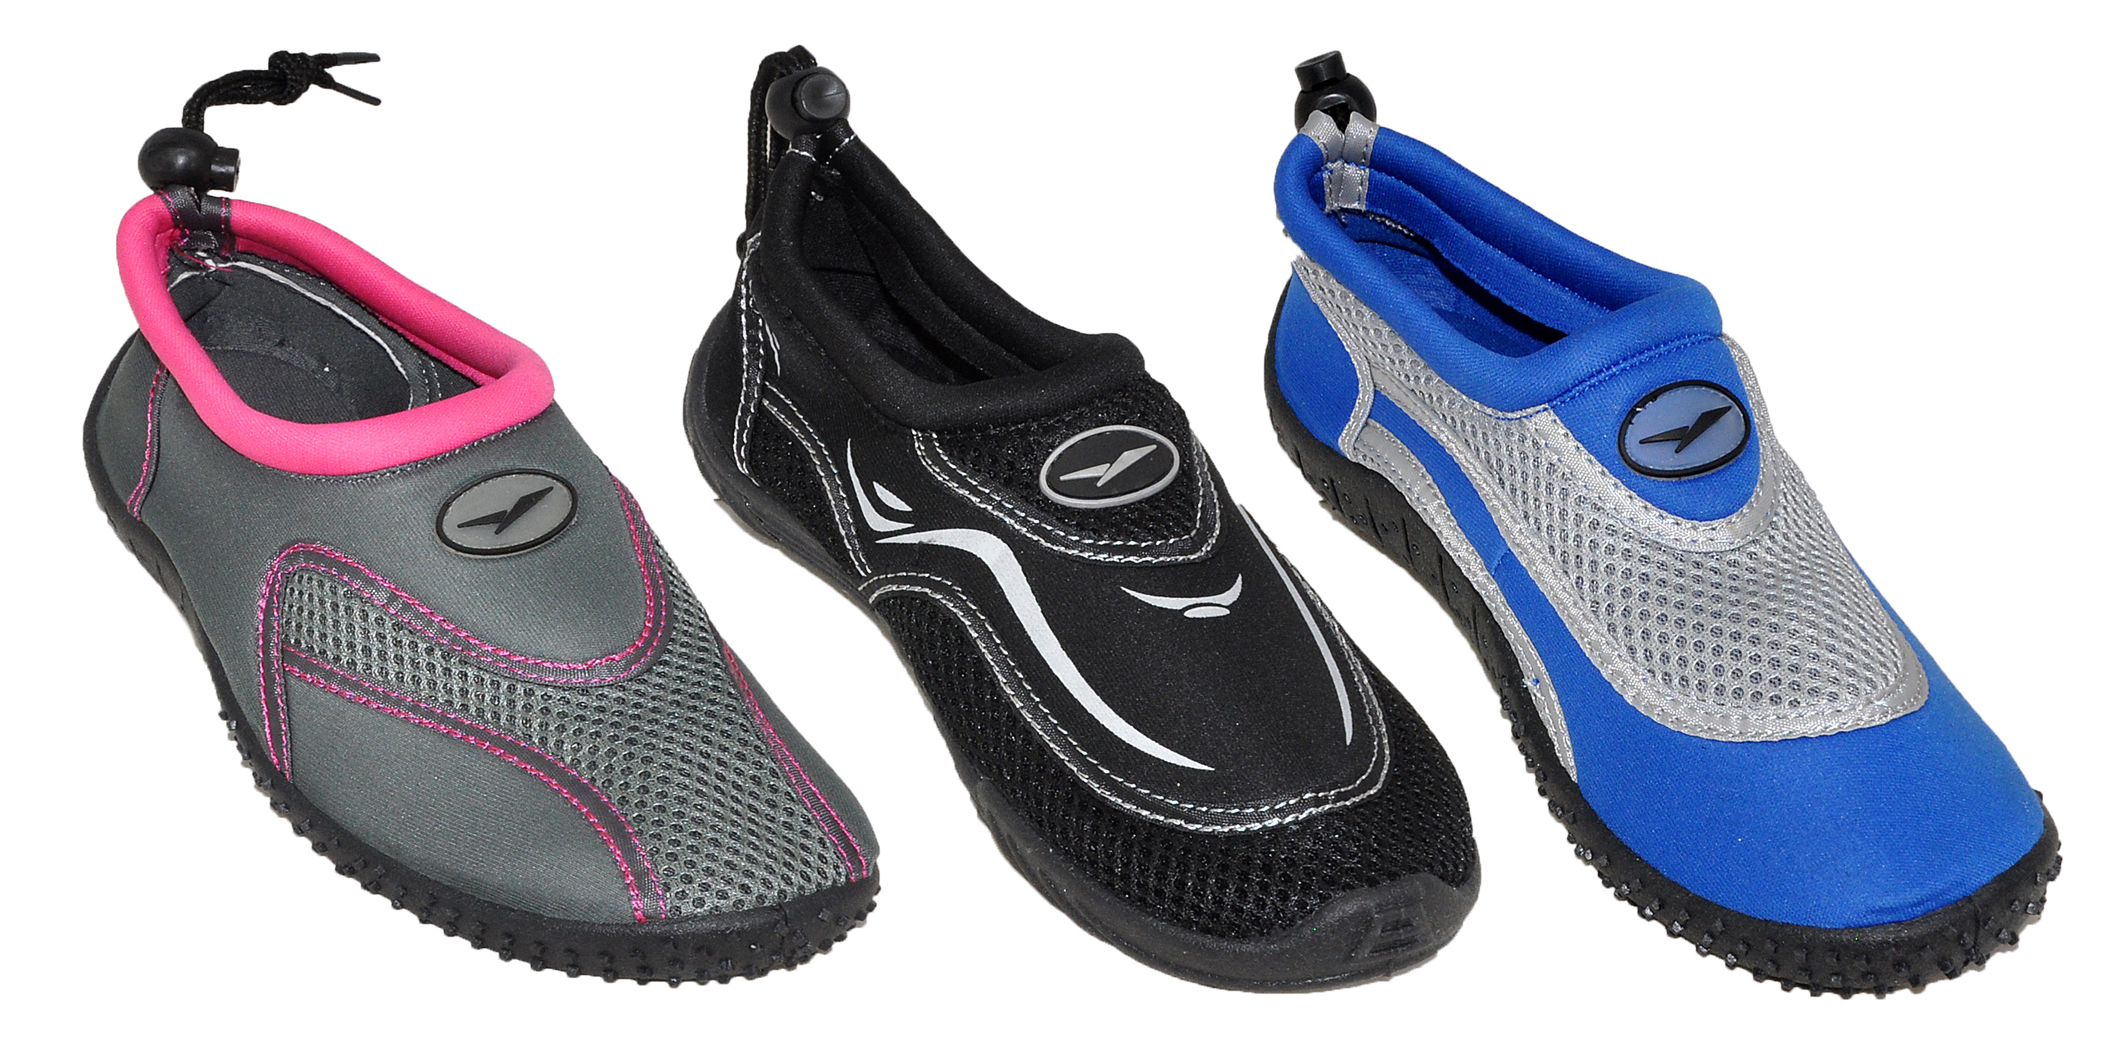 Women's Aqua SHOES w/ Drawstring & Toggle - Assorted Color - Sizes 5-10